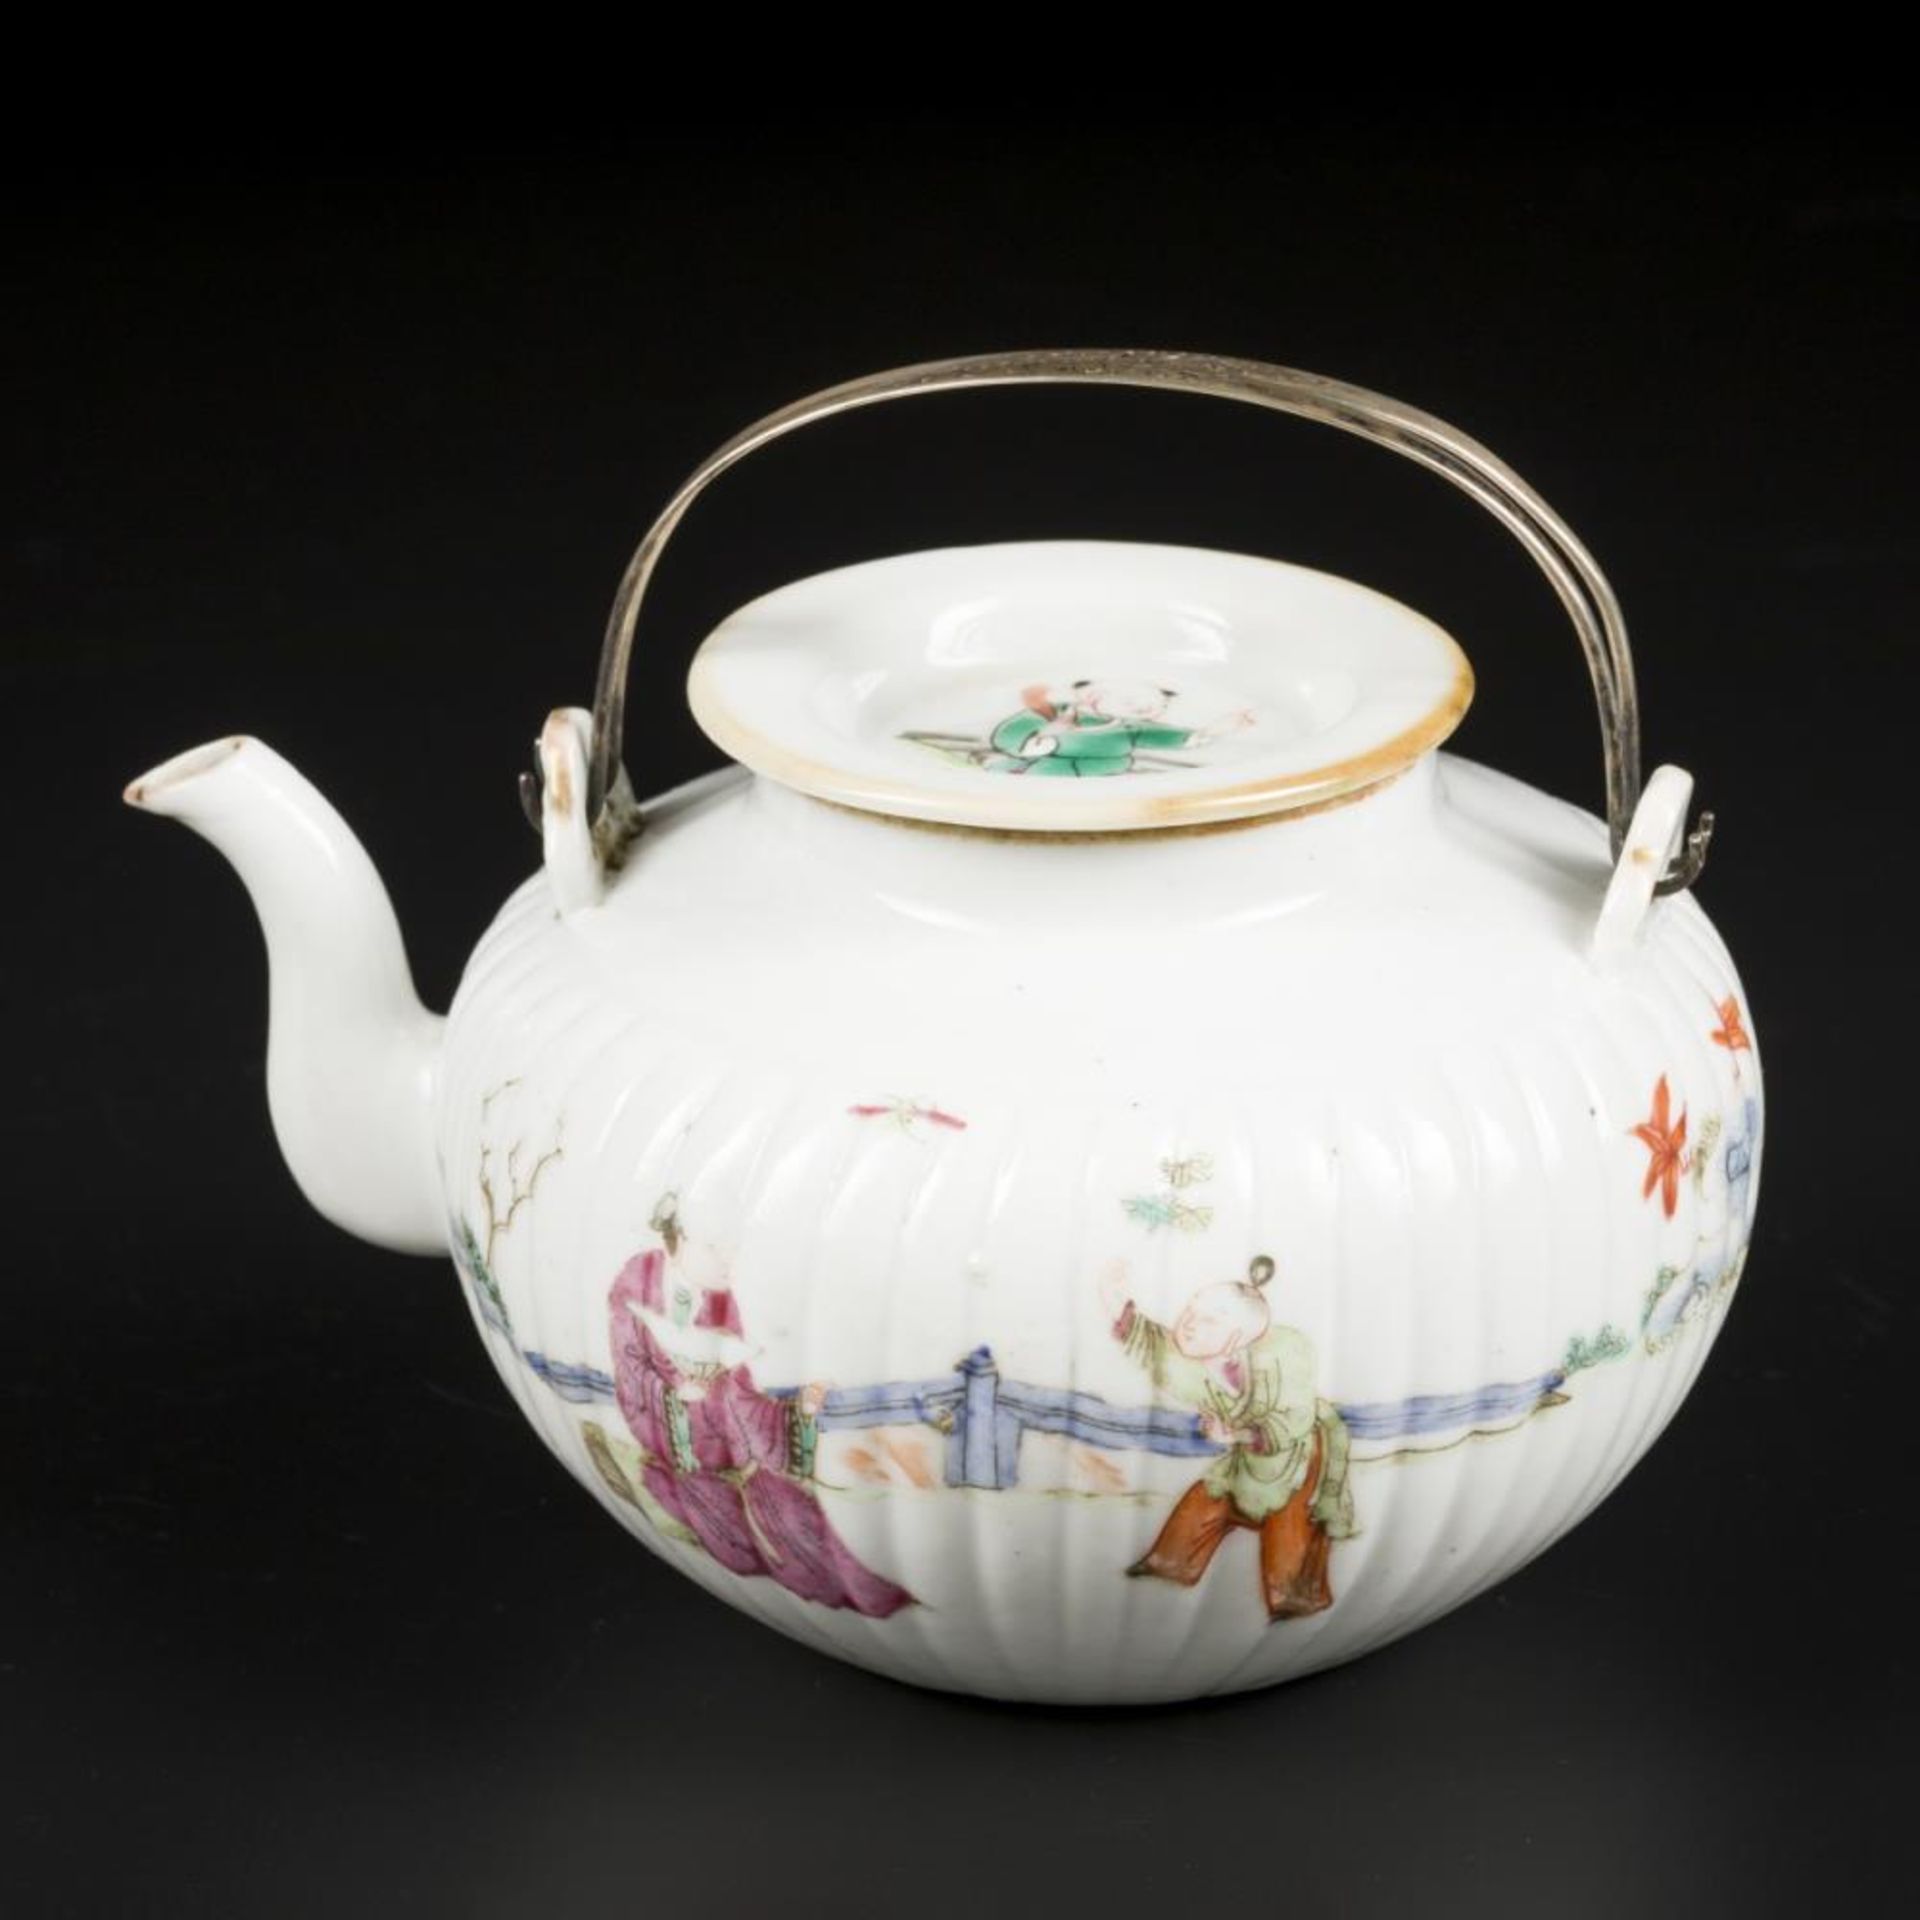 A porcelain famille rose teapot decorated with various figures. China, Republic period.